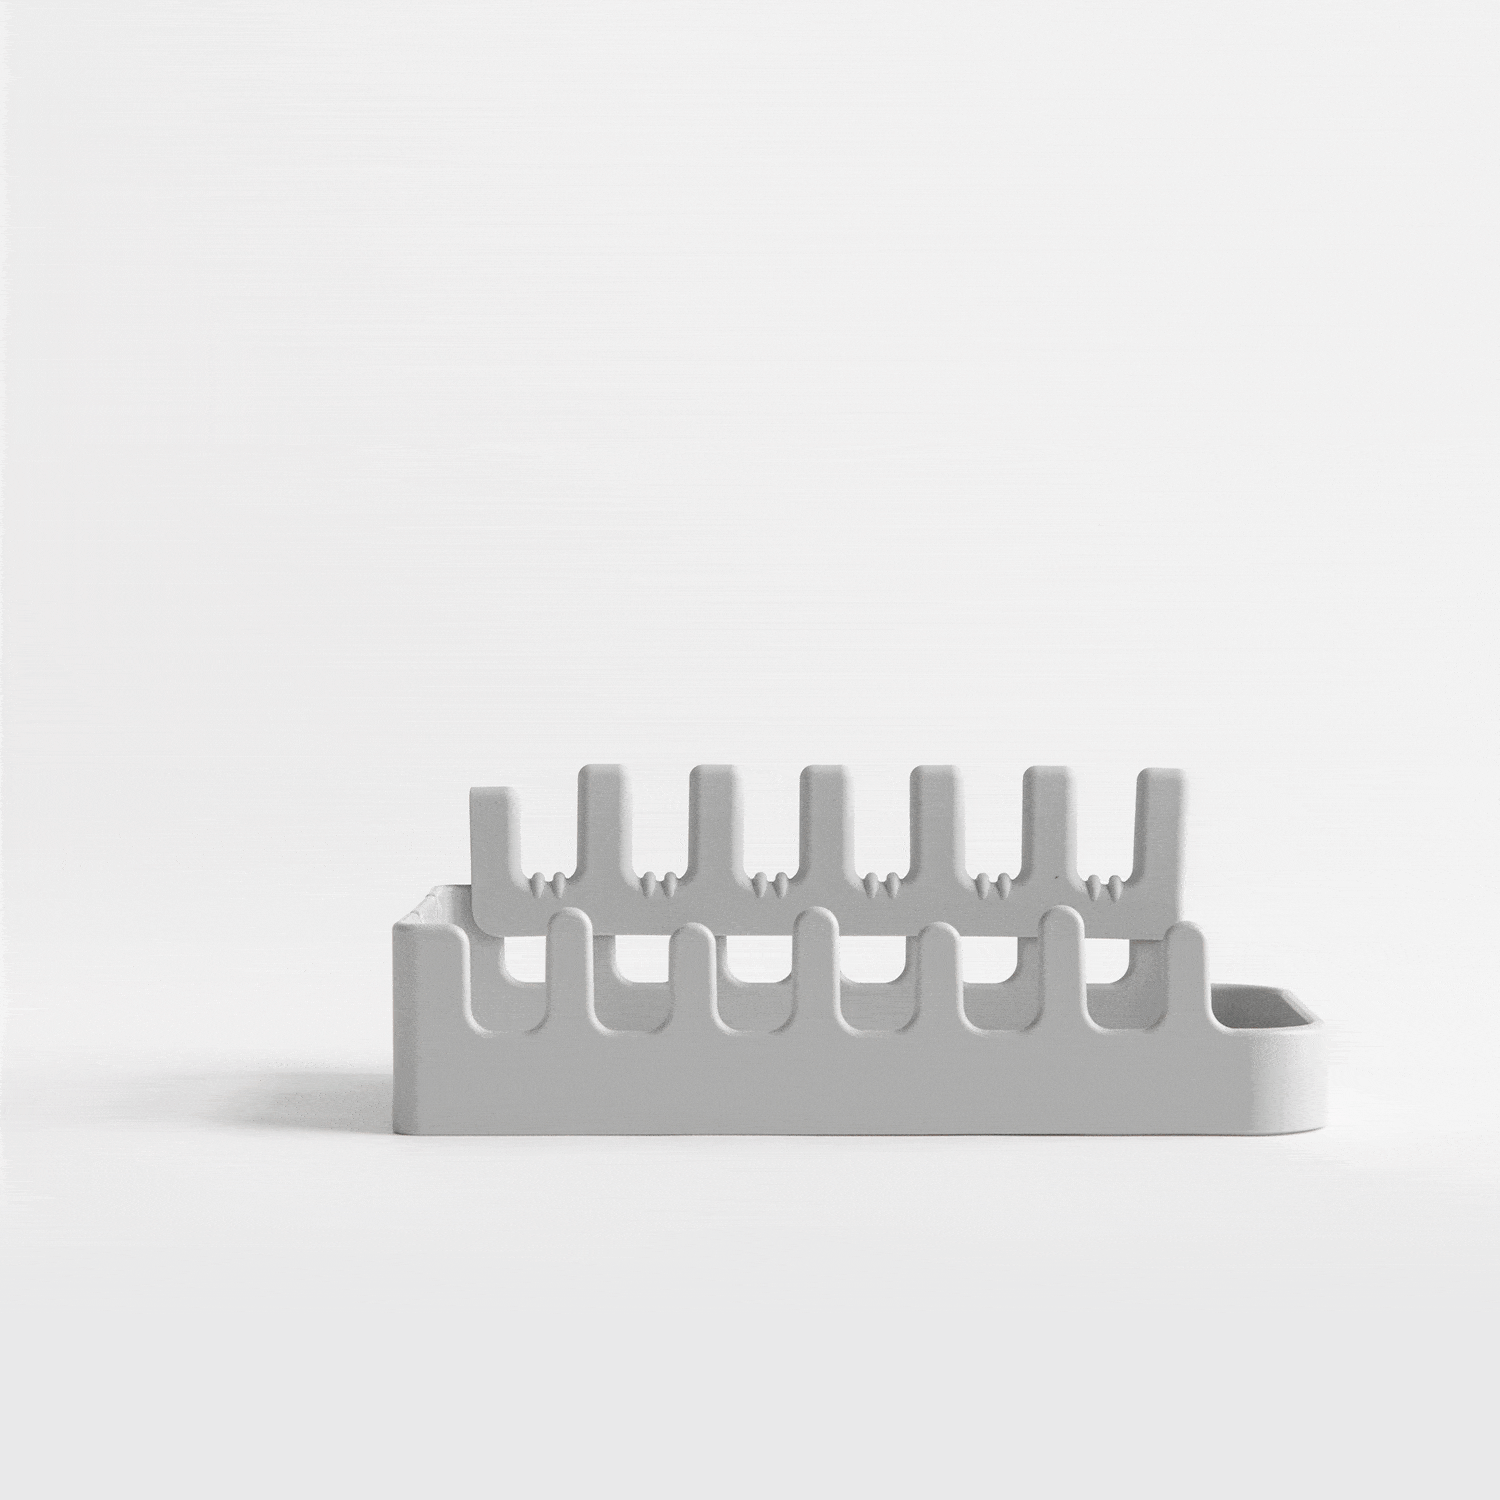 Assembly options of sandstone dish pad rack